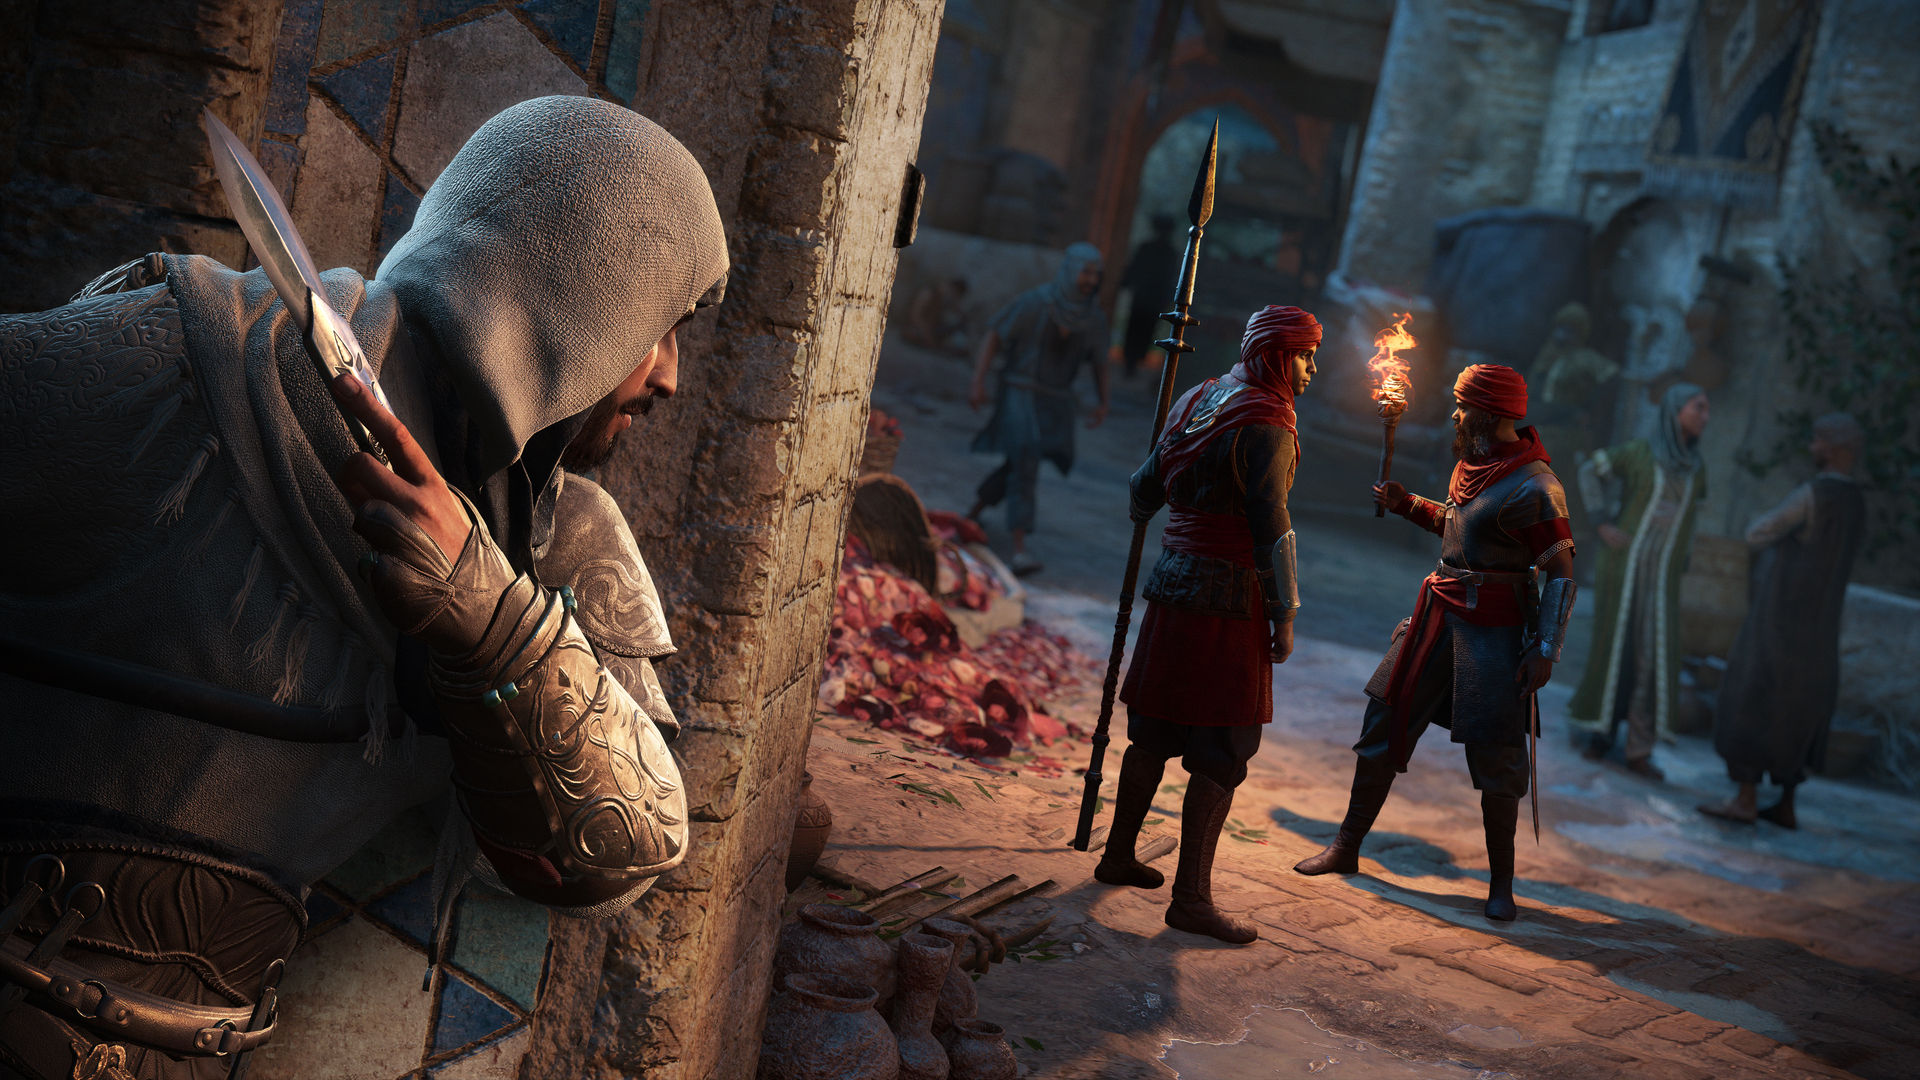 New Assassin's Creed video game brings Baghdad's Golden Age back to life, Entertainment News